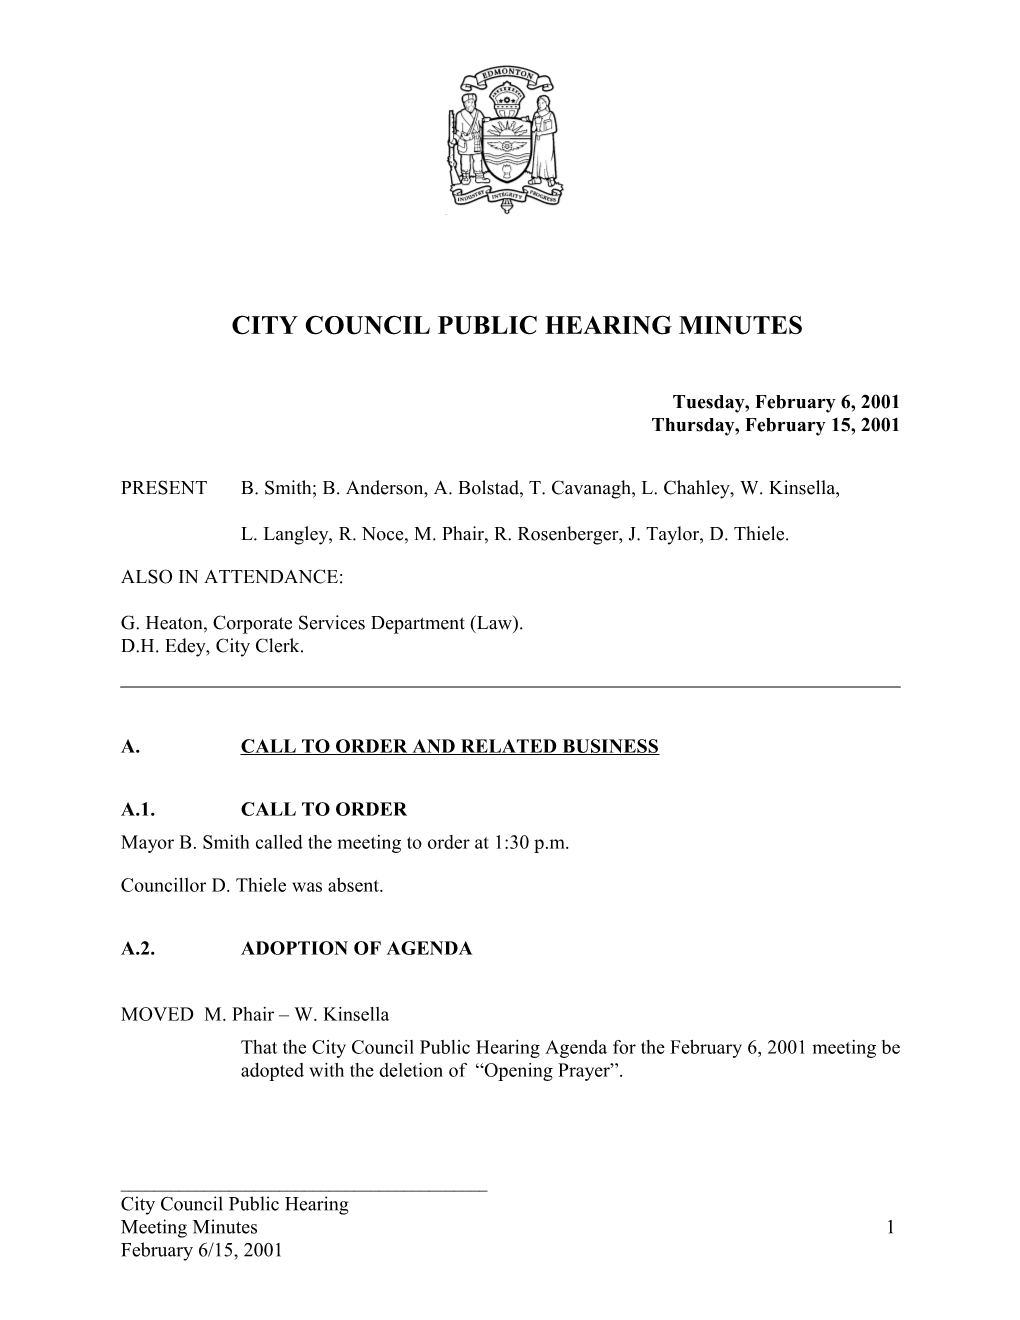 Minutes for City Council February 6, 2001 Meeting